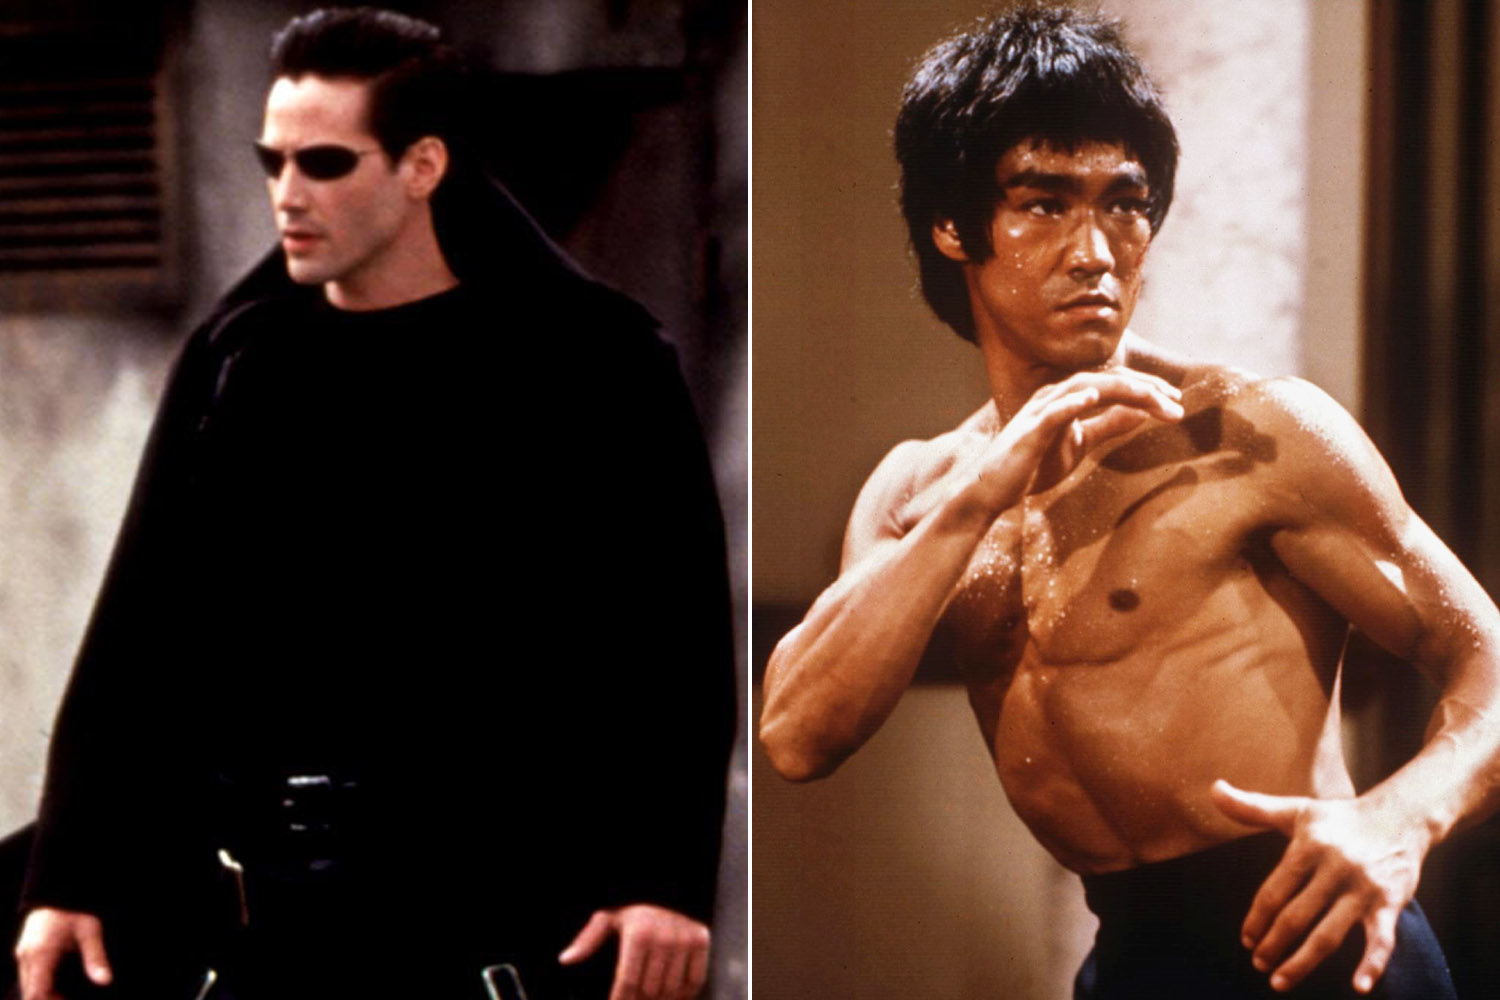 In the combat training program before Keanu Reeves starts his furious attacks on Morpheus, he rubs his nose with his thumb and finger, a similar mannerism of Bruce Lee before he attacks on his opponents. The move was improvised by Reeves.